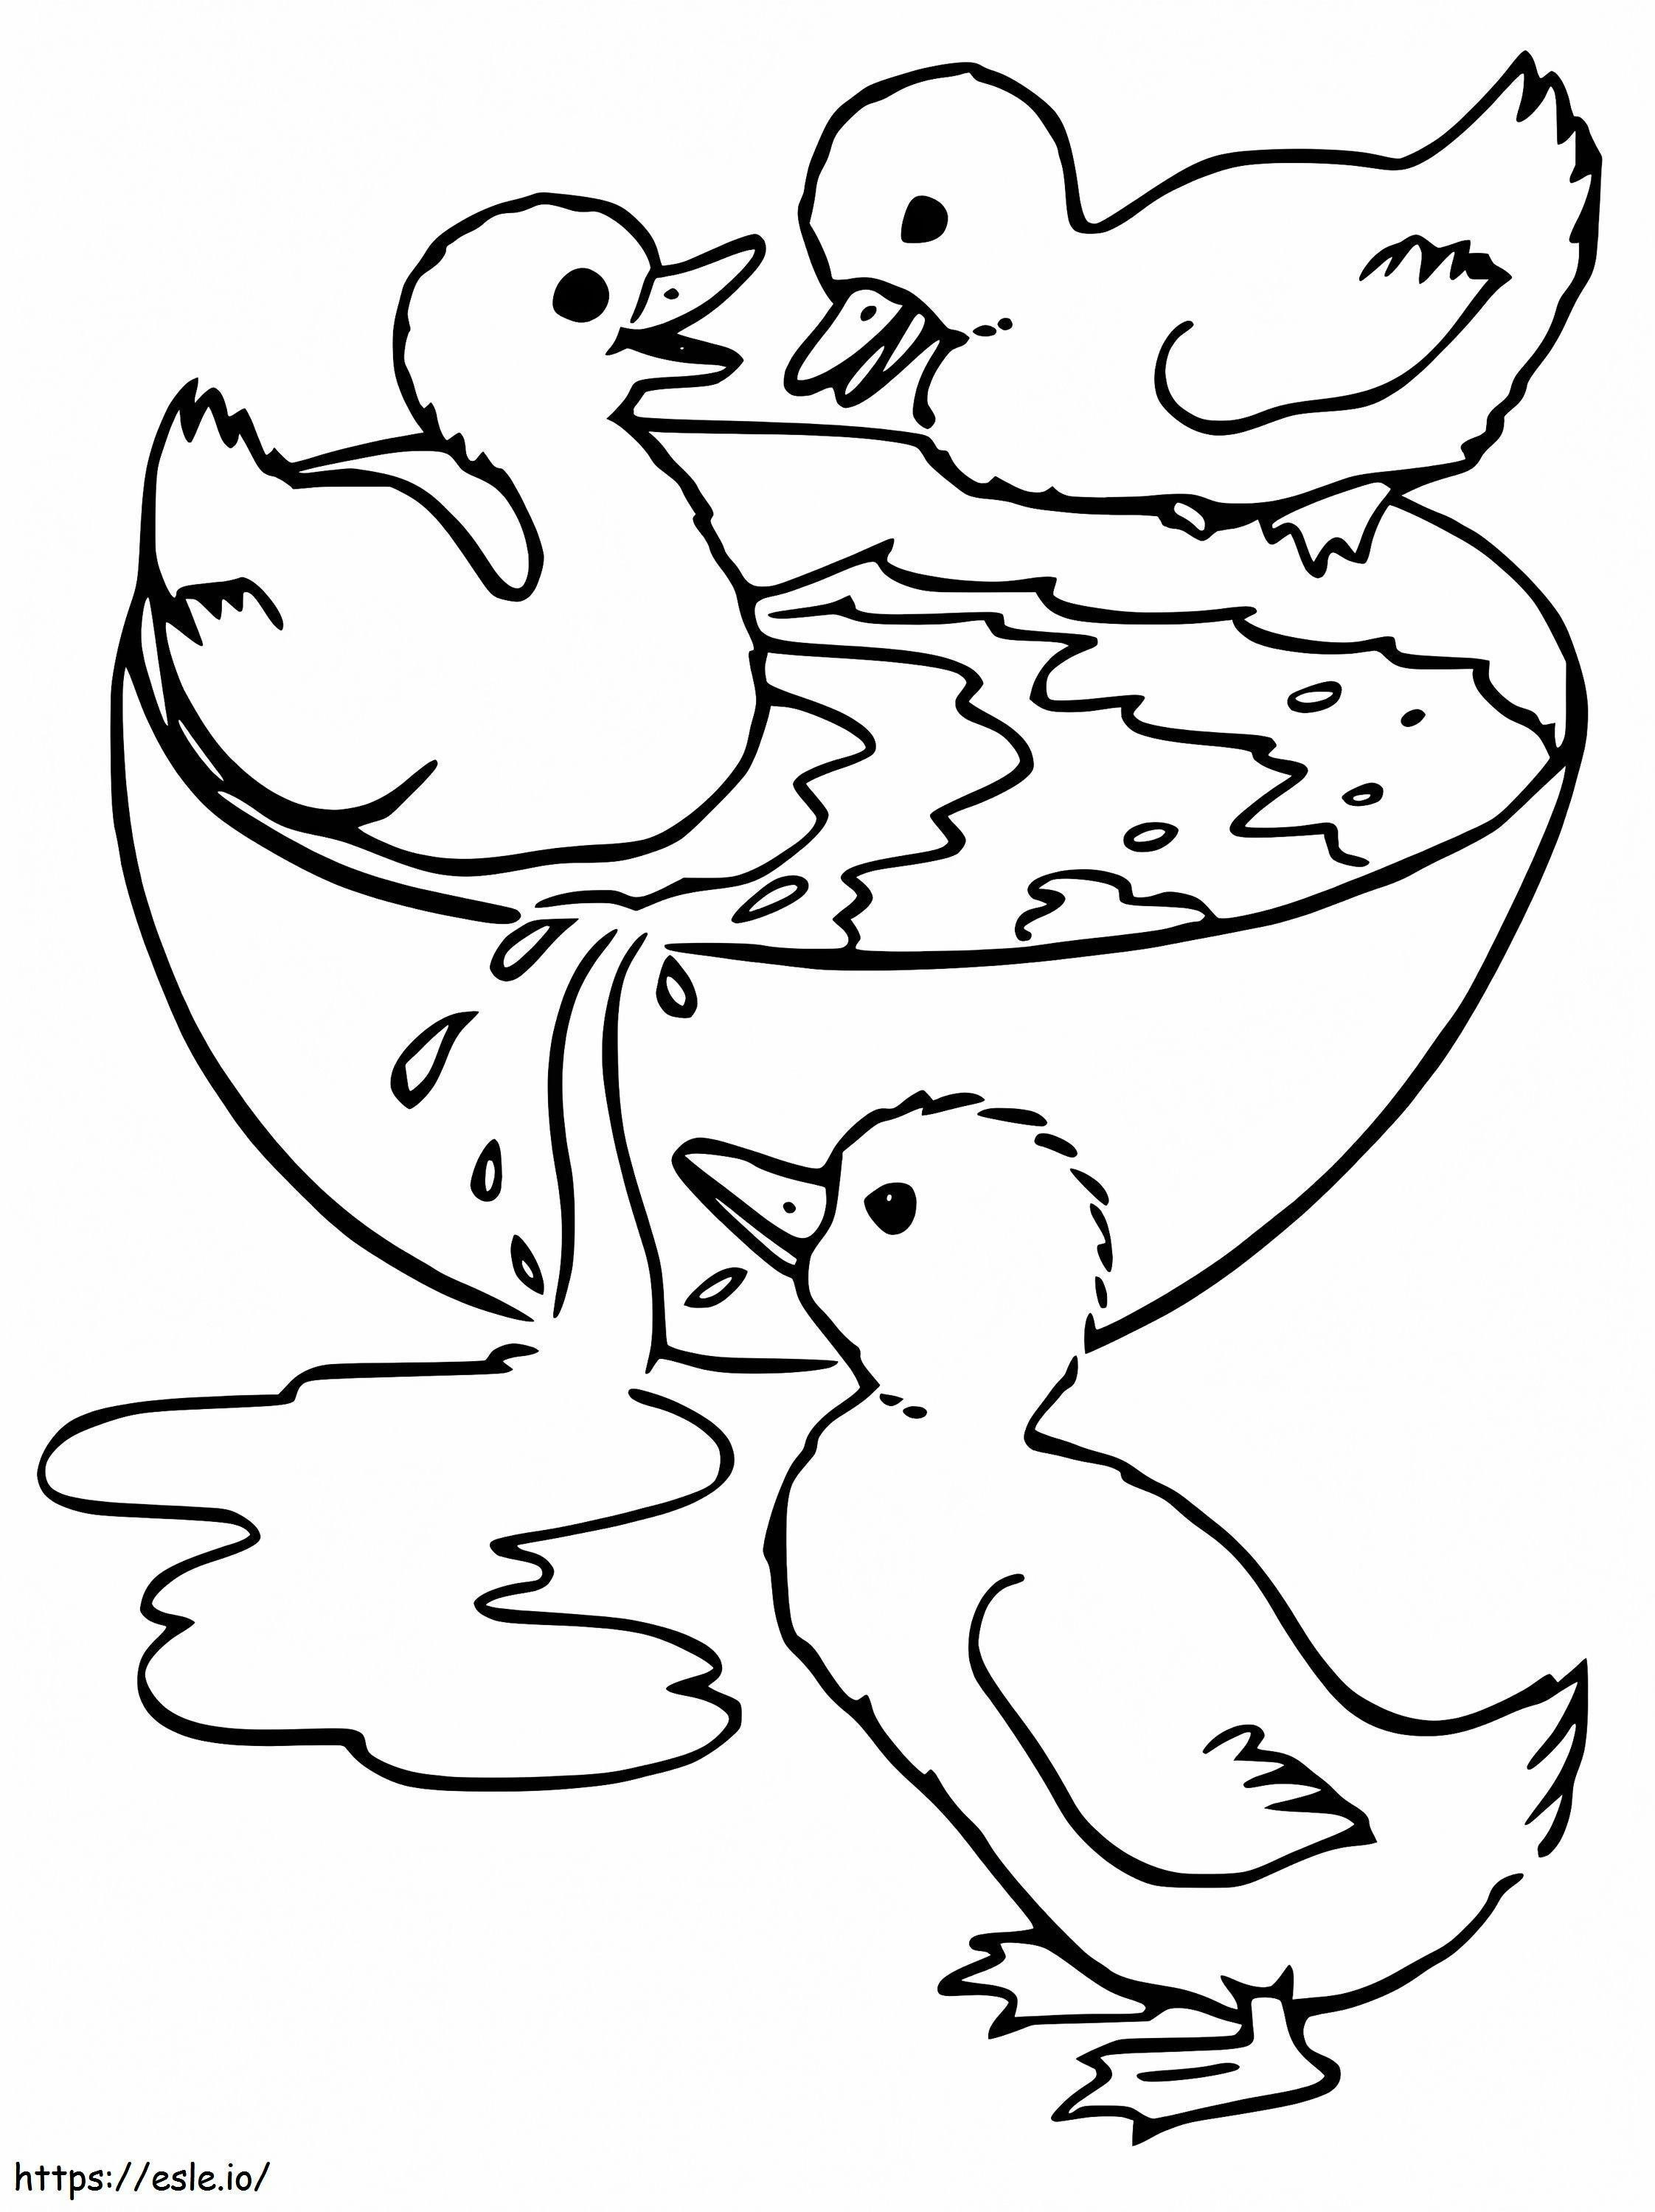 Three Ducklings coloring page